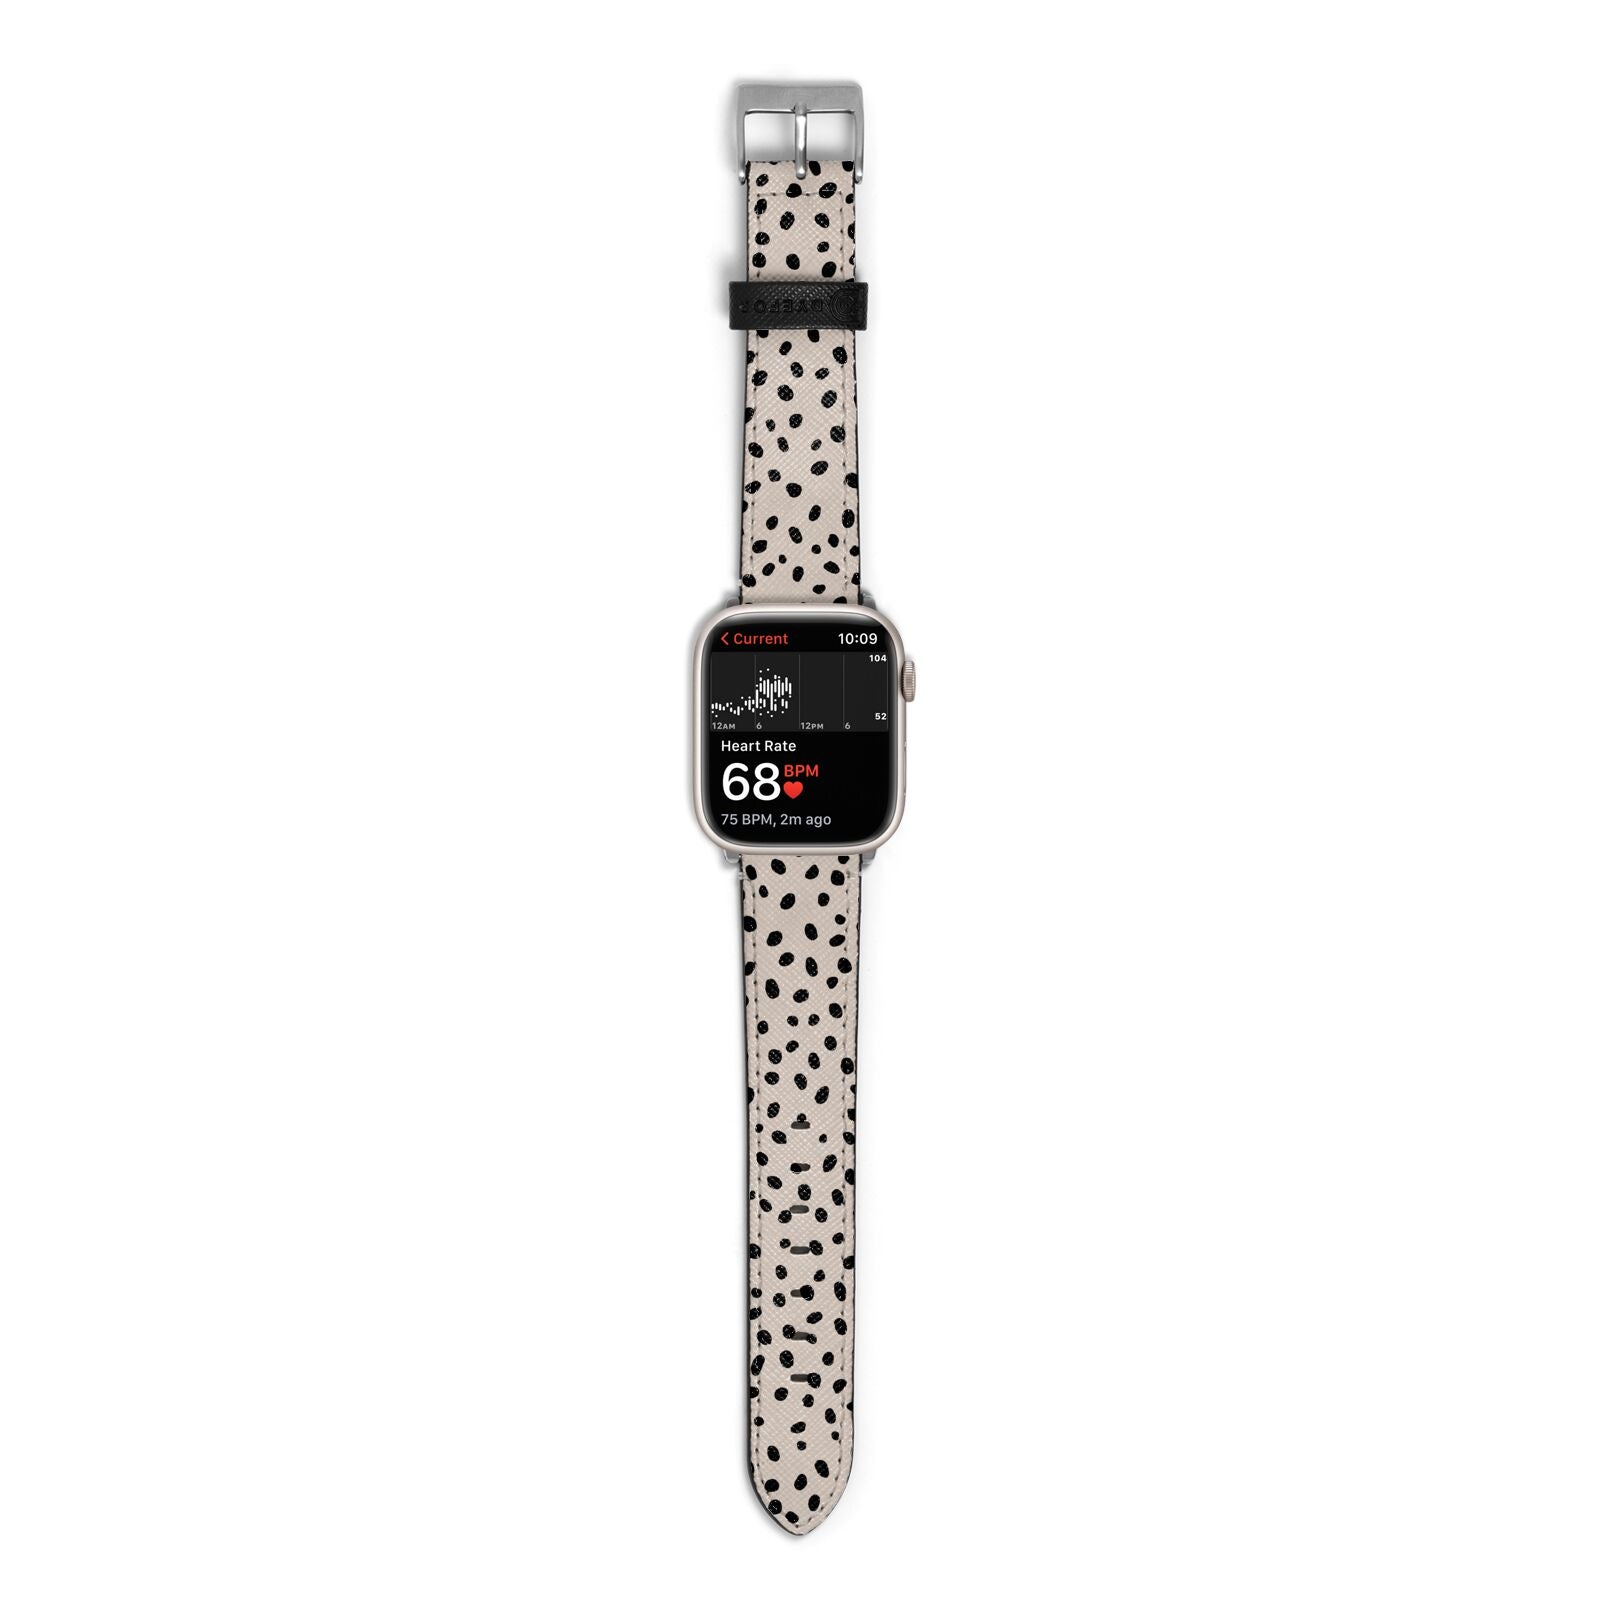 Almond Polka Dot Apple Watch Strap Size 38mm with Silver Hardware